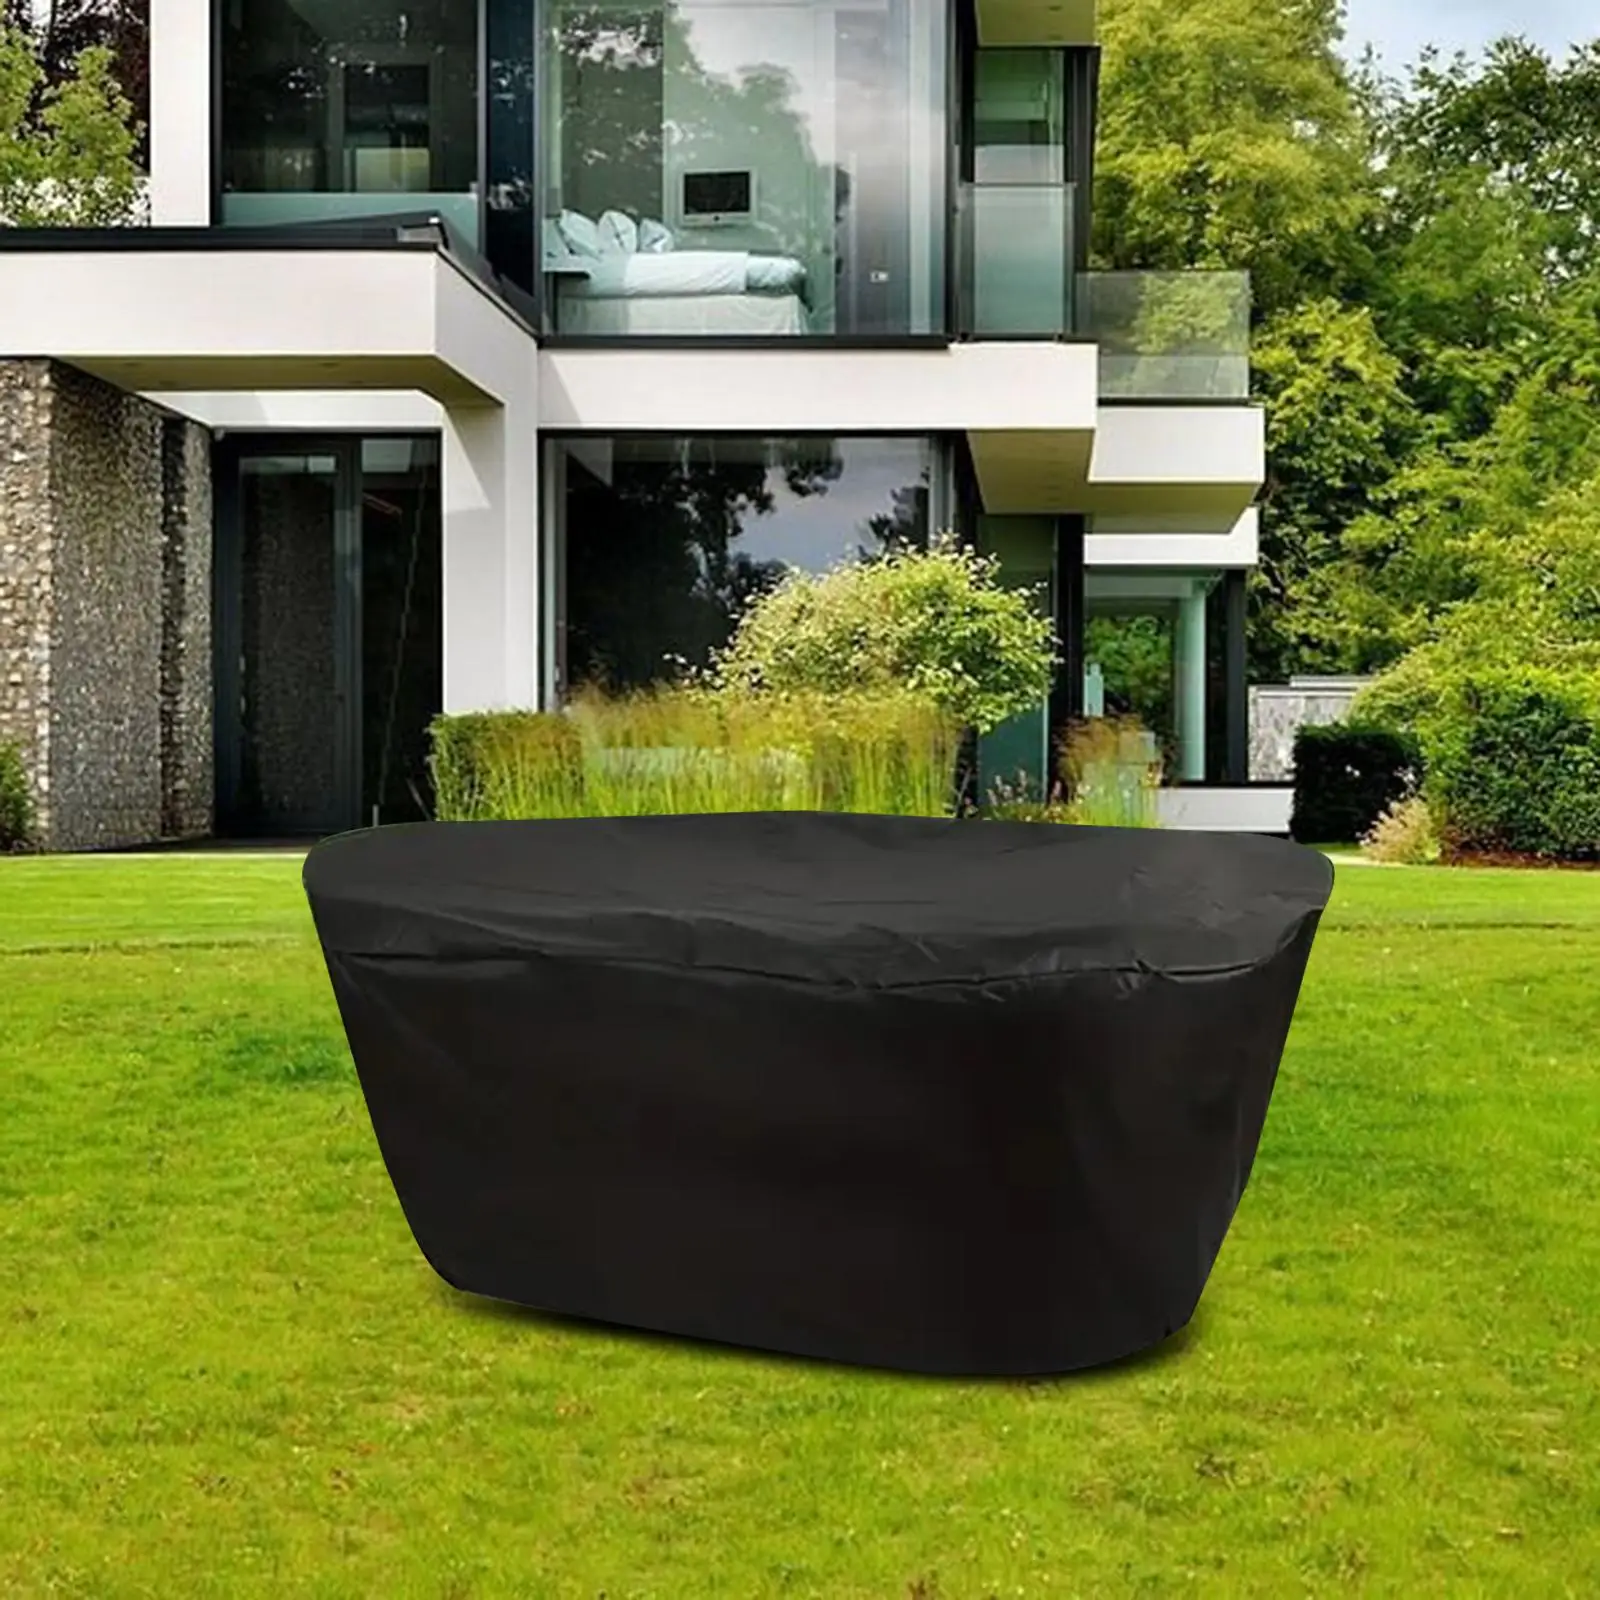 Outdoor Stock Tank Cover Compact with Drawstring Home Backyard Protector Garden Yard Pool Cover Oval Tank above Ground Pool Tub